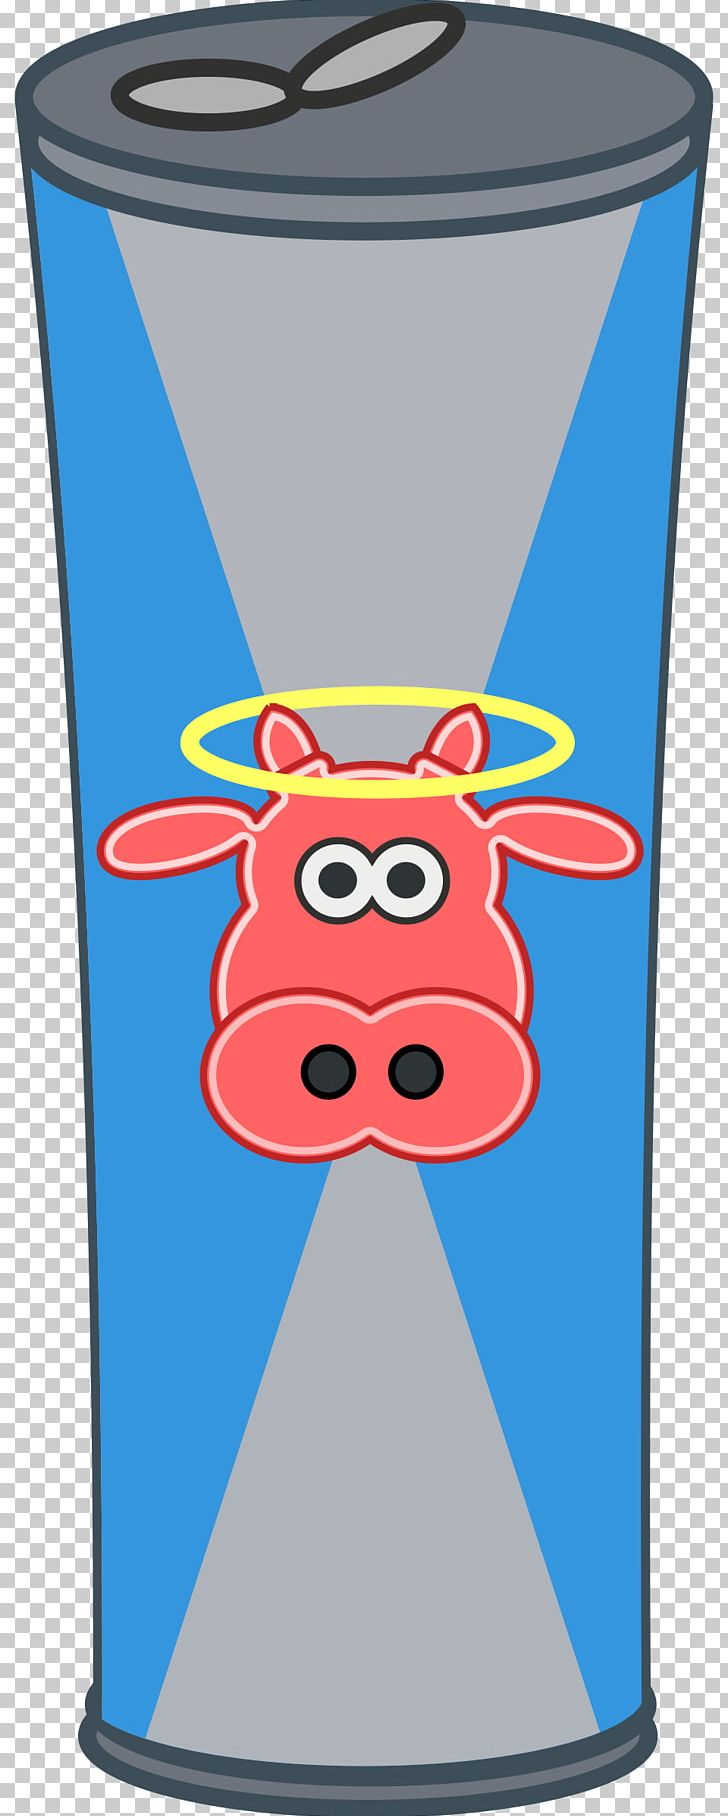 Drinks clipart red drink. Energy bull fizzy beverage